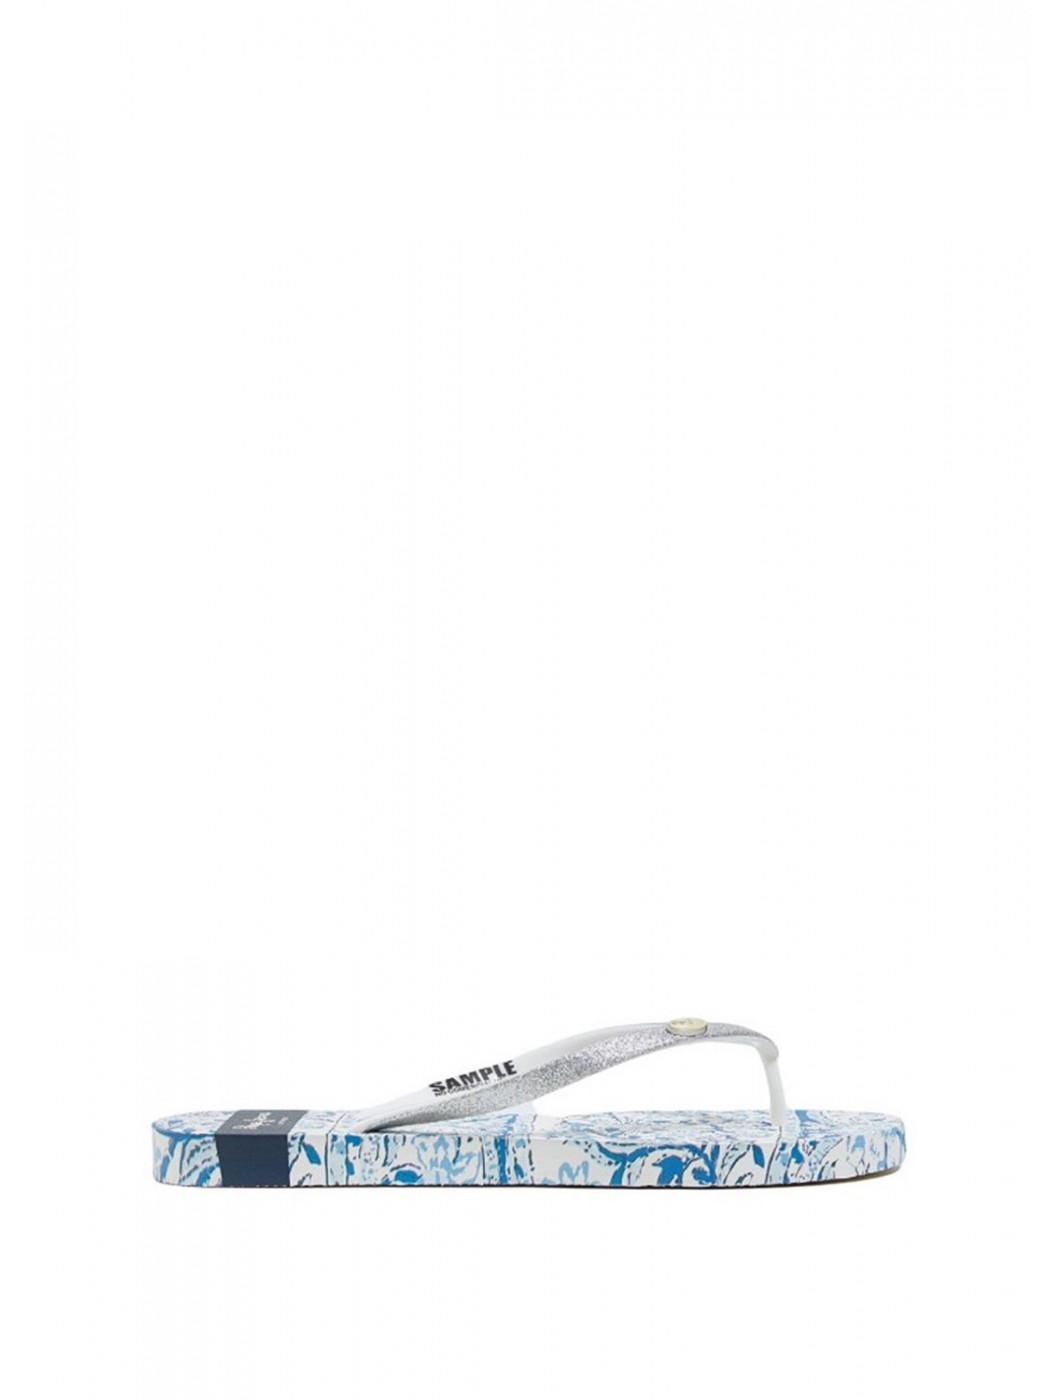 CHANCLAS PEPE JEANS MUJER...